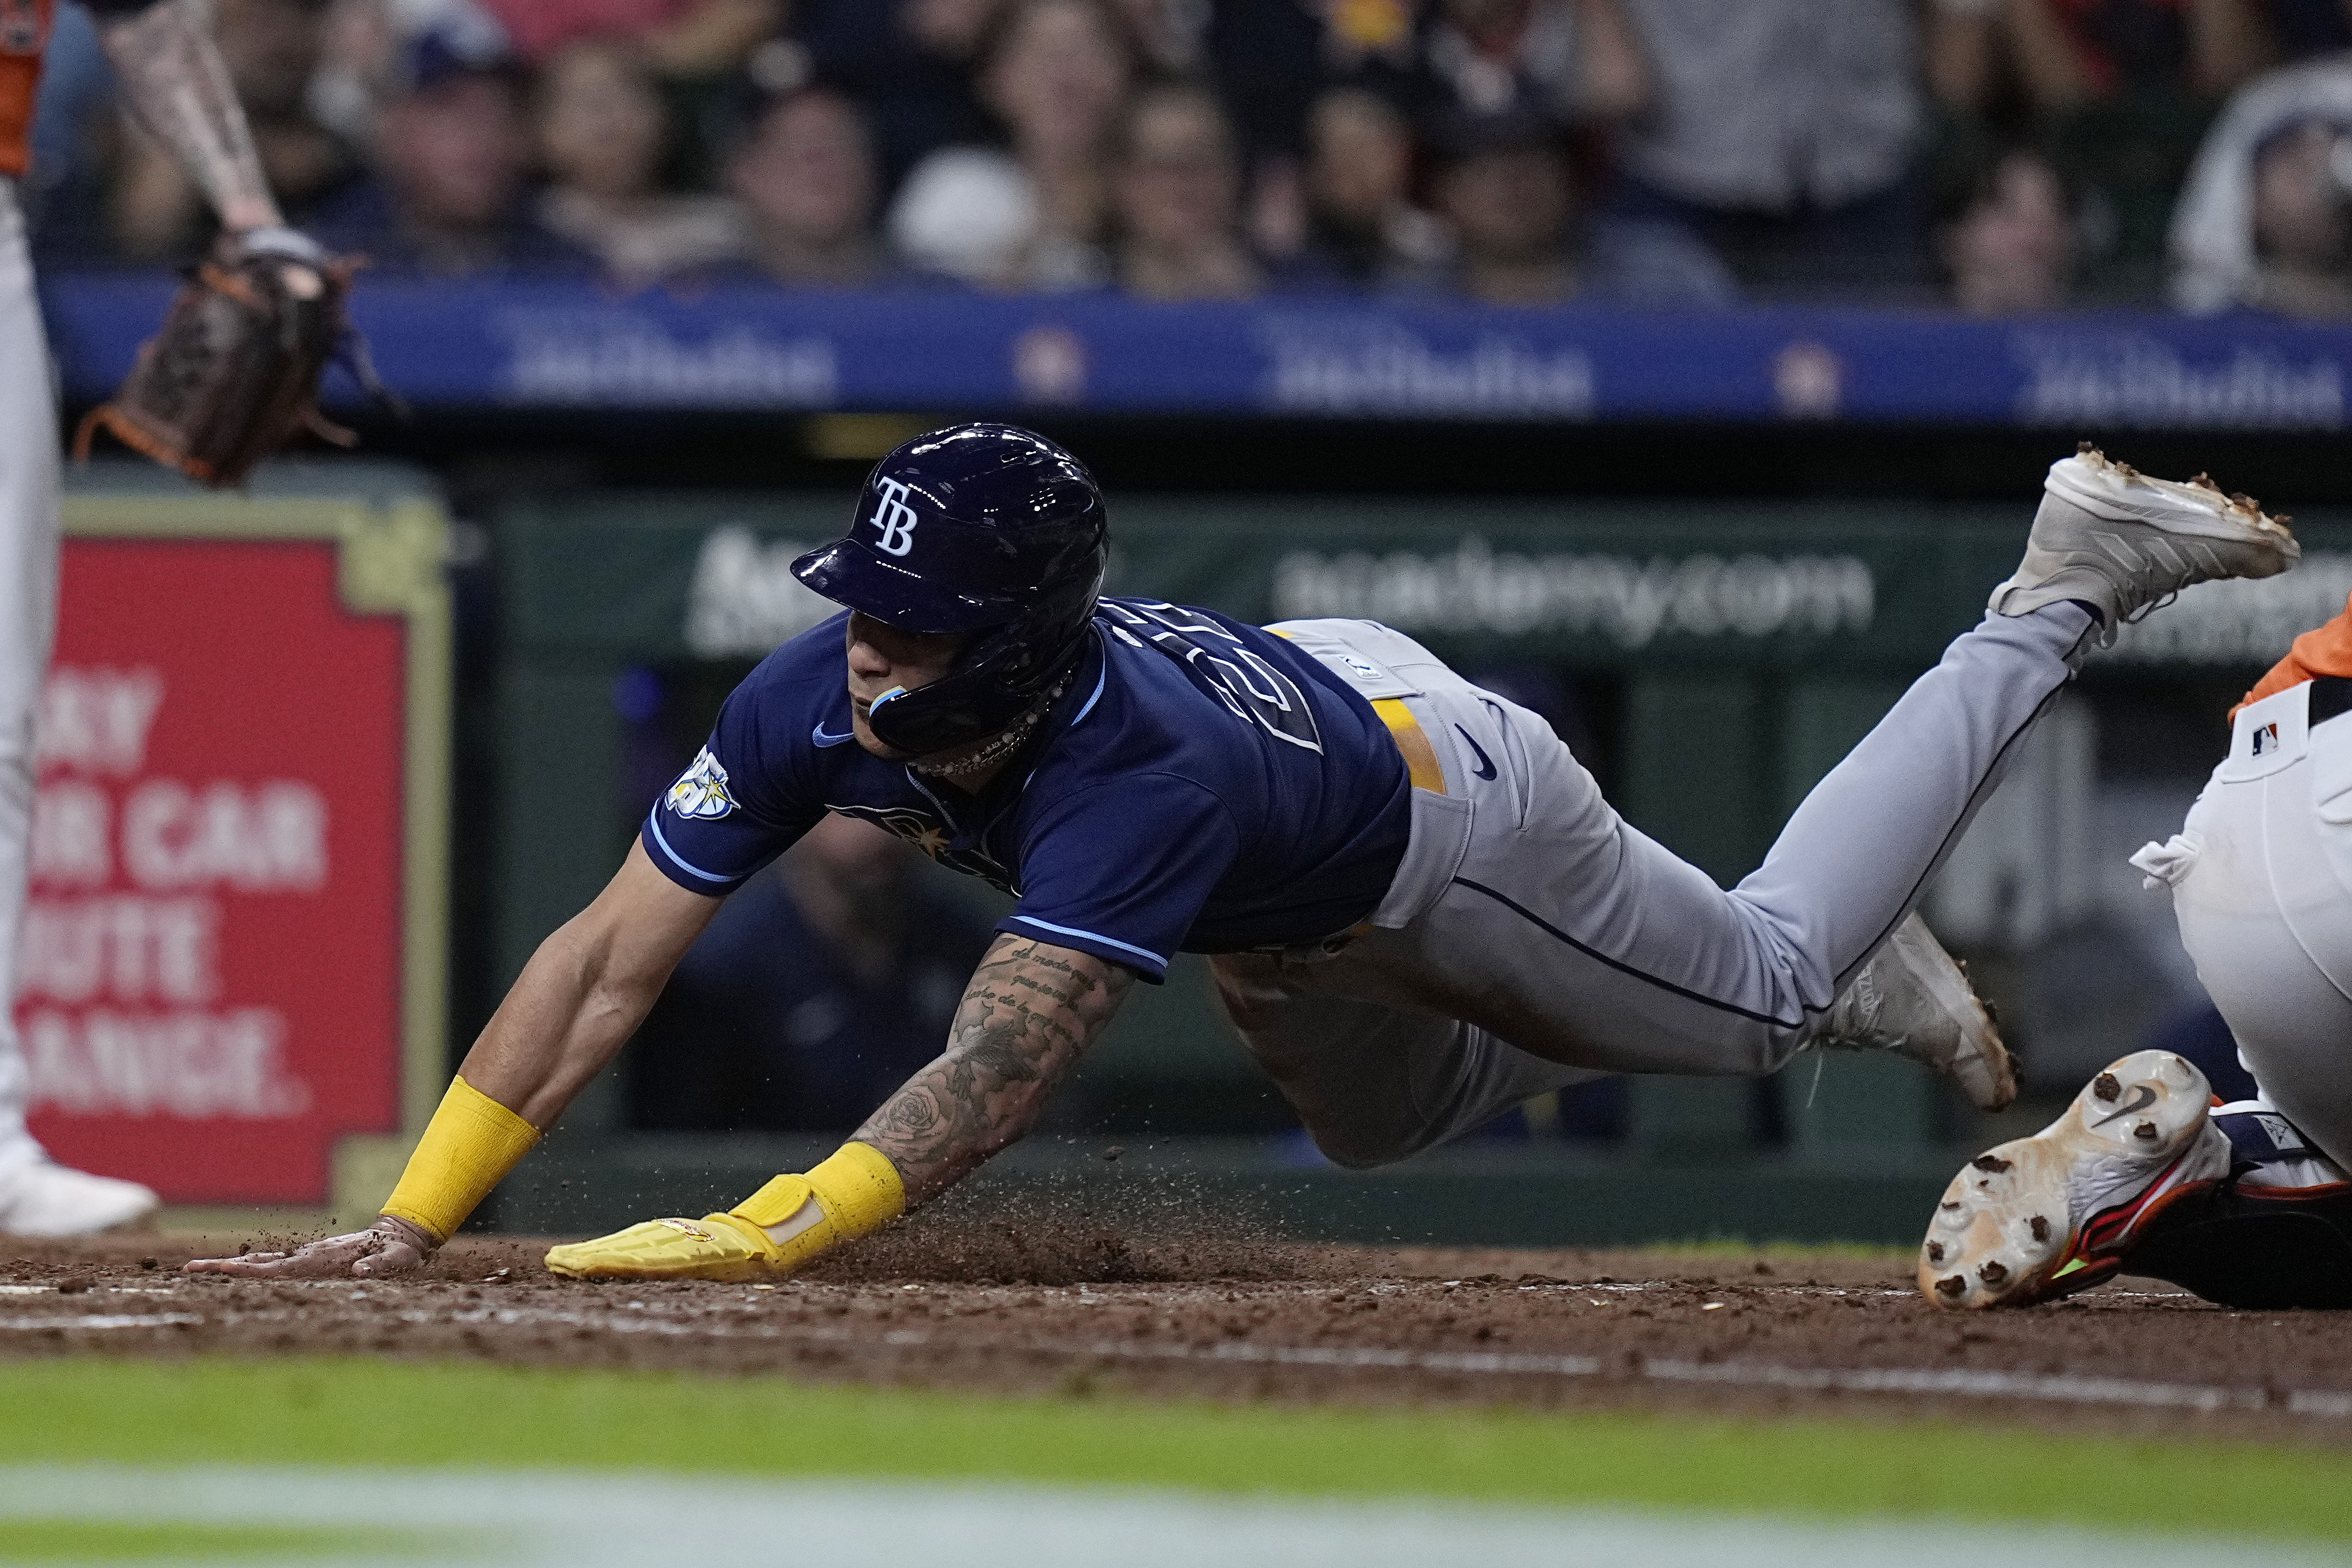 After wasted opportunities, Rays rally in ninth to beat Astros